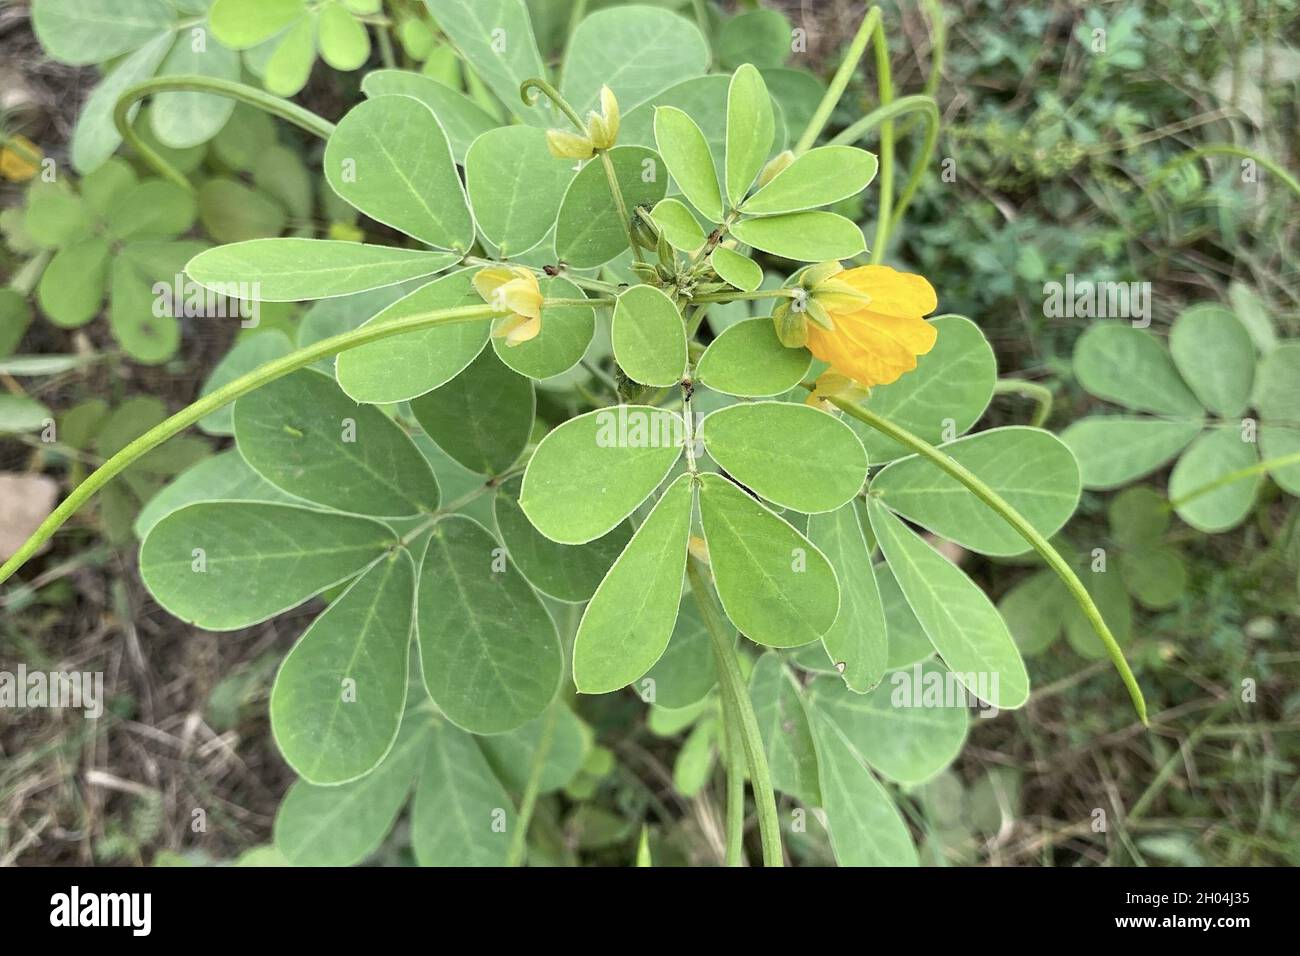 Top view of sicklepod (Senna obtusifolia, foetid cassia) plant with yellow flowers Stock Photo